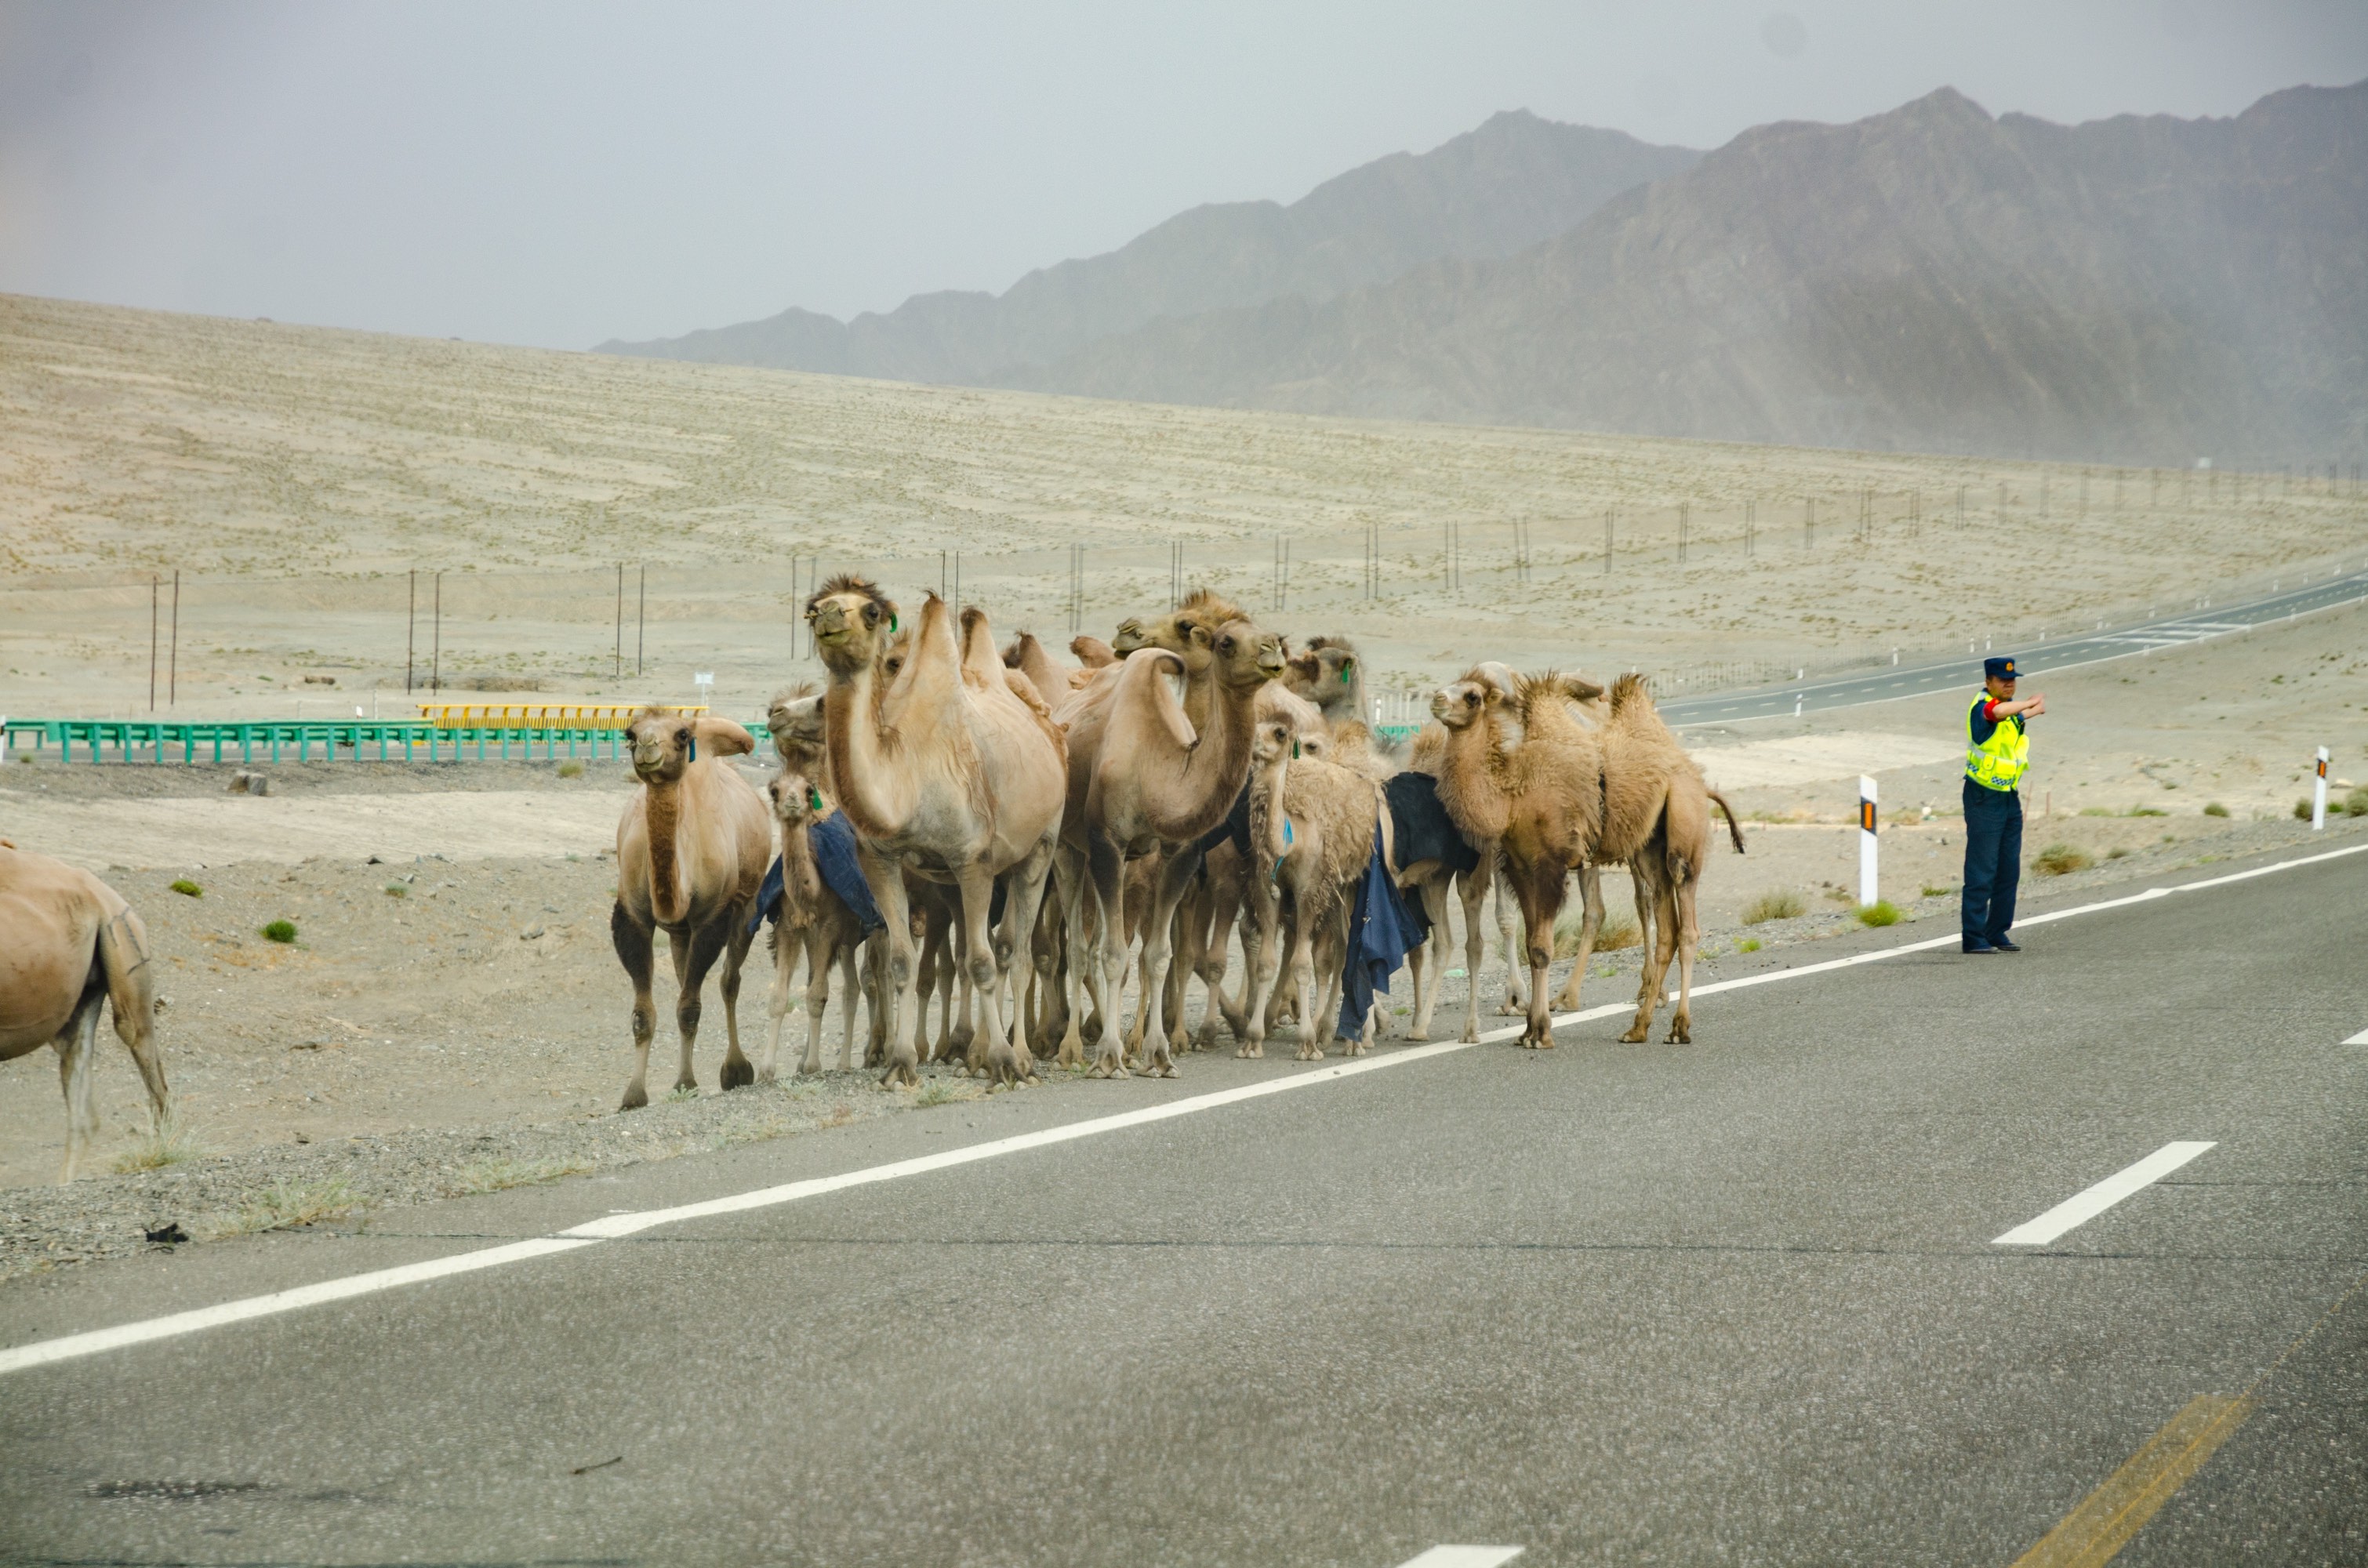 Camels on the highway